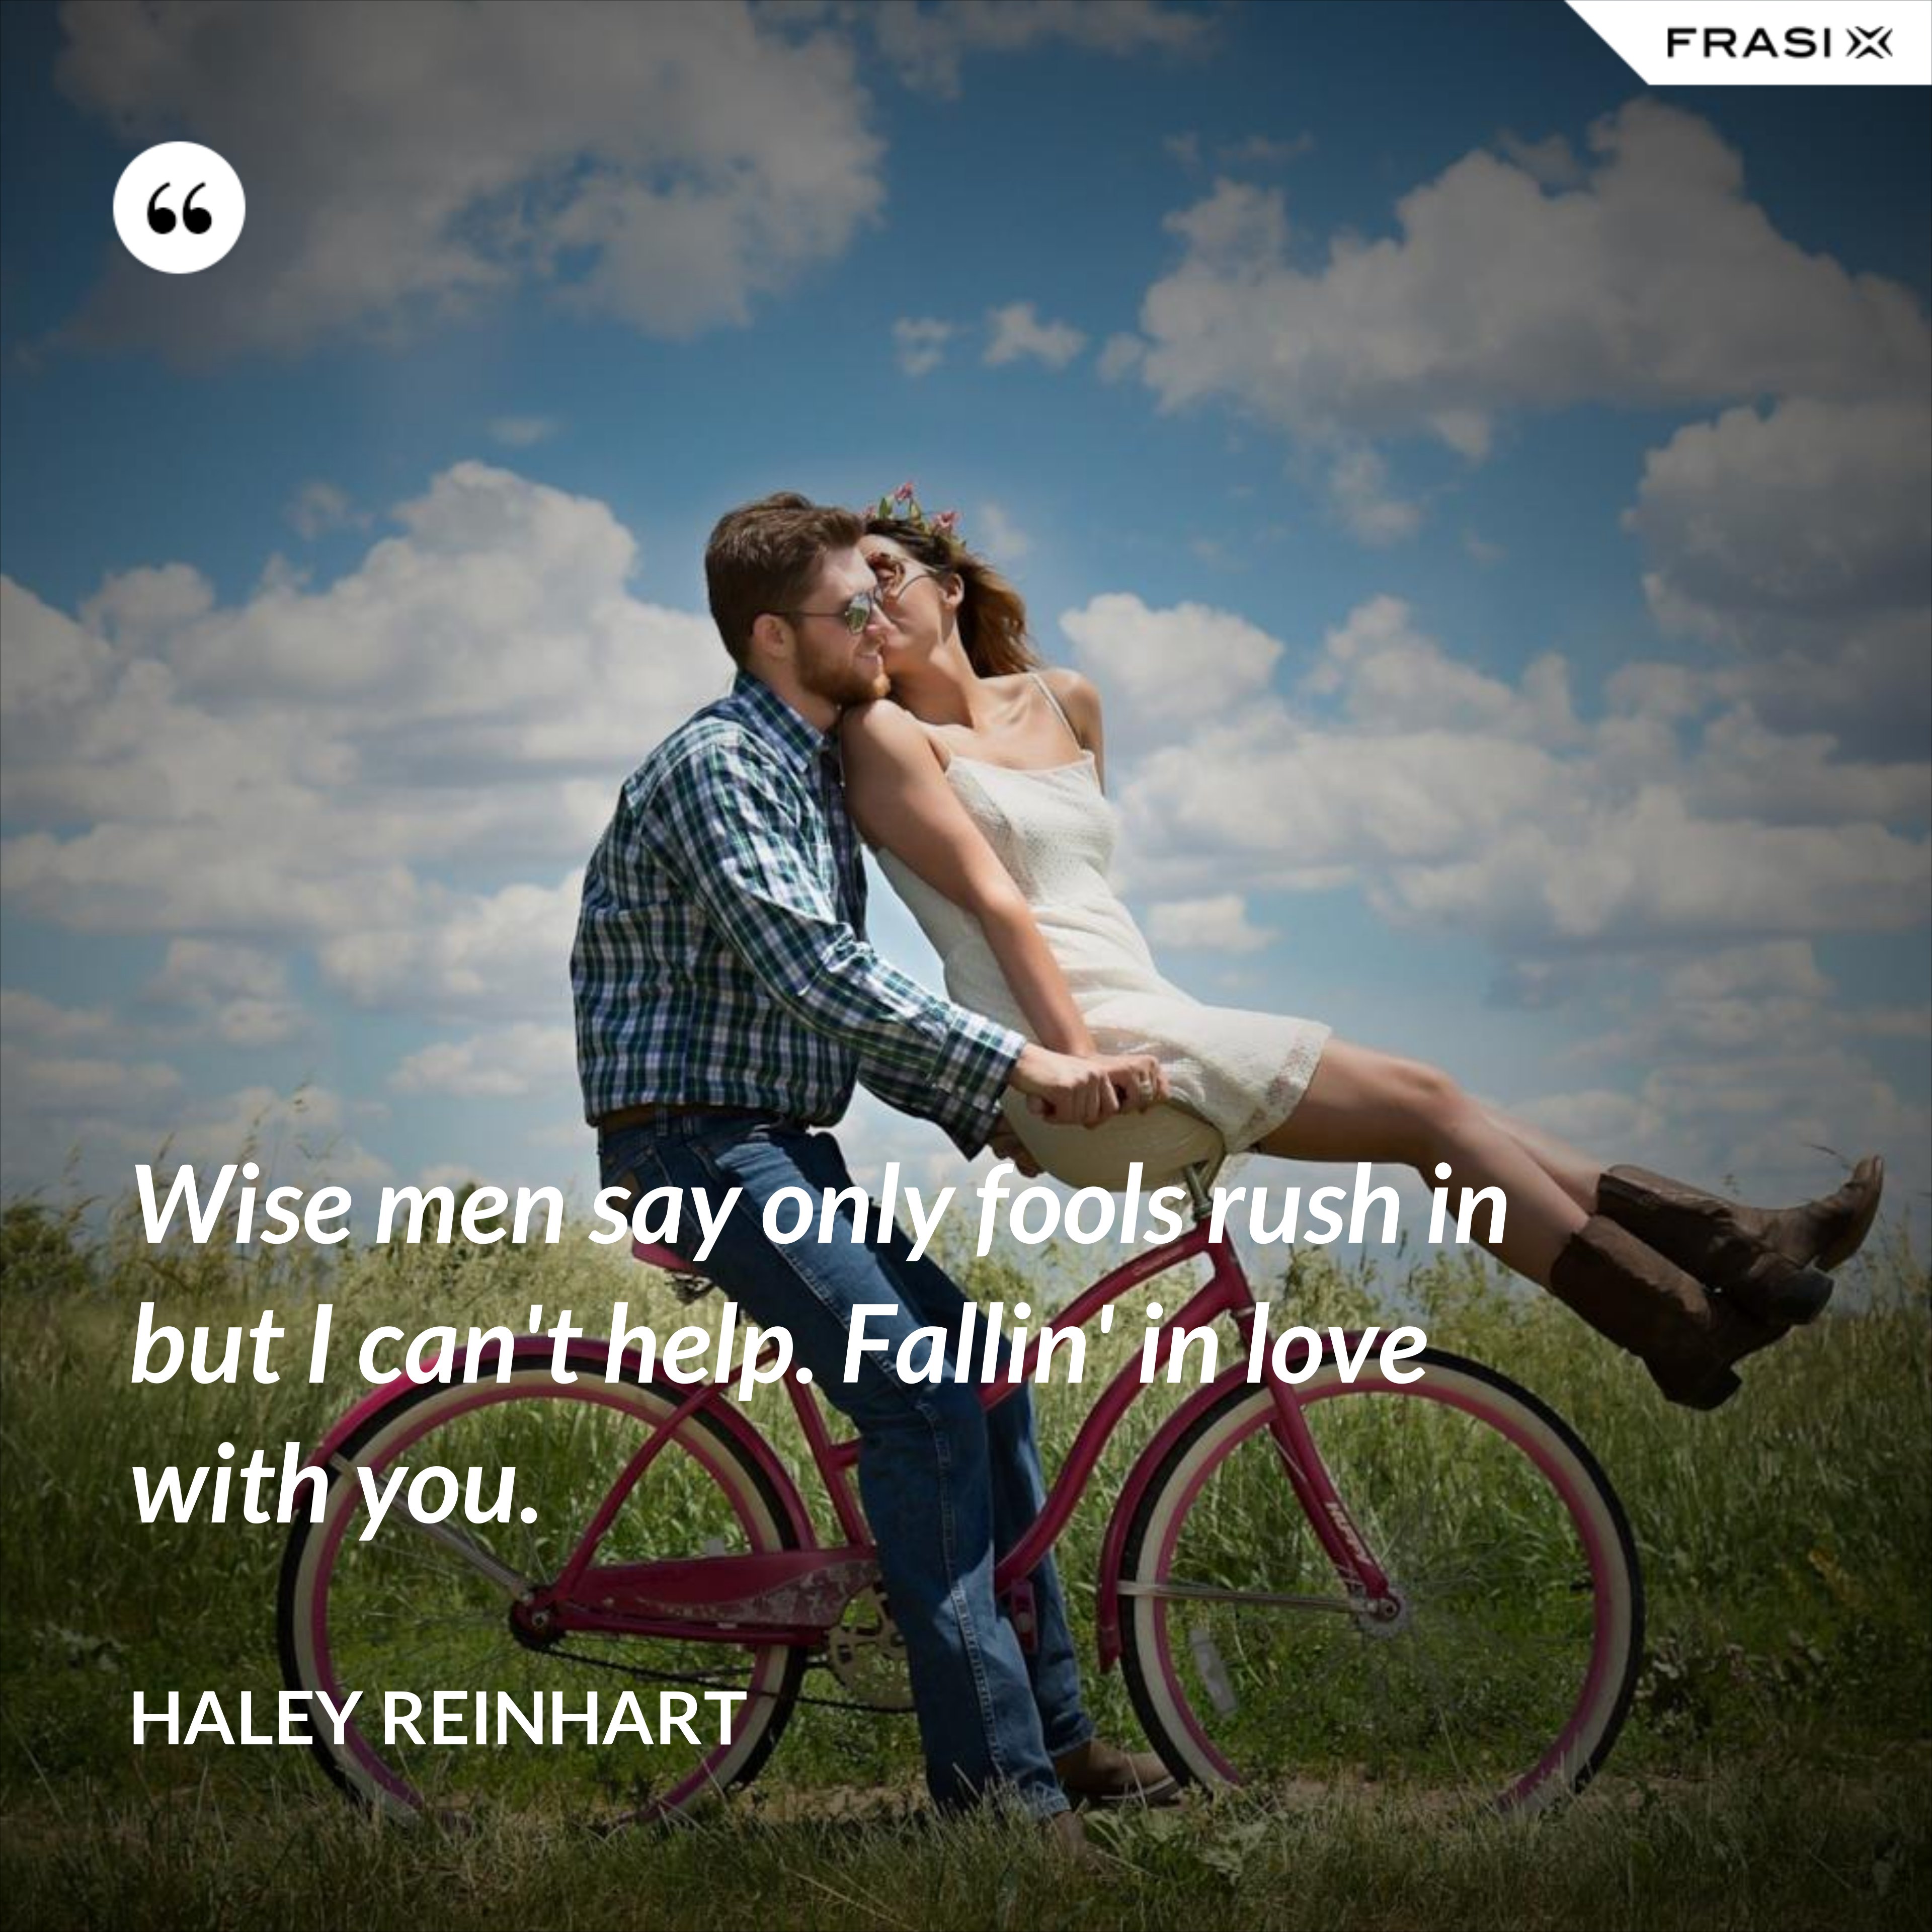 Wise men say only fools rush in but I can't help. Fallin' in love with you. - Haley Reinhart